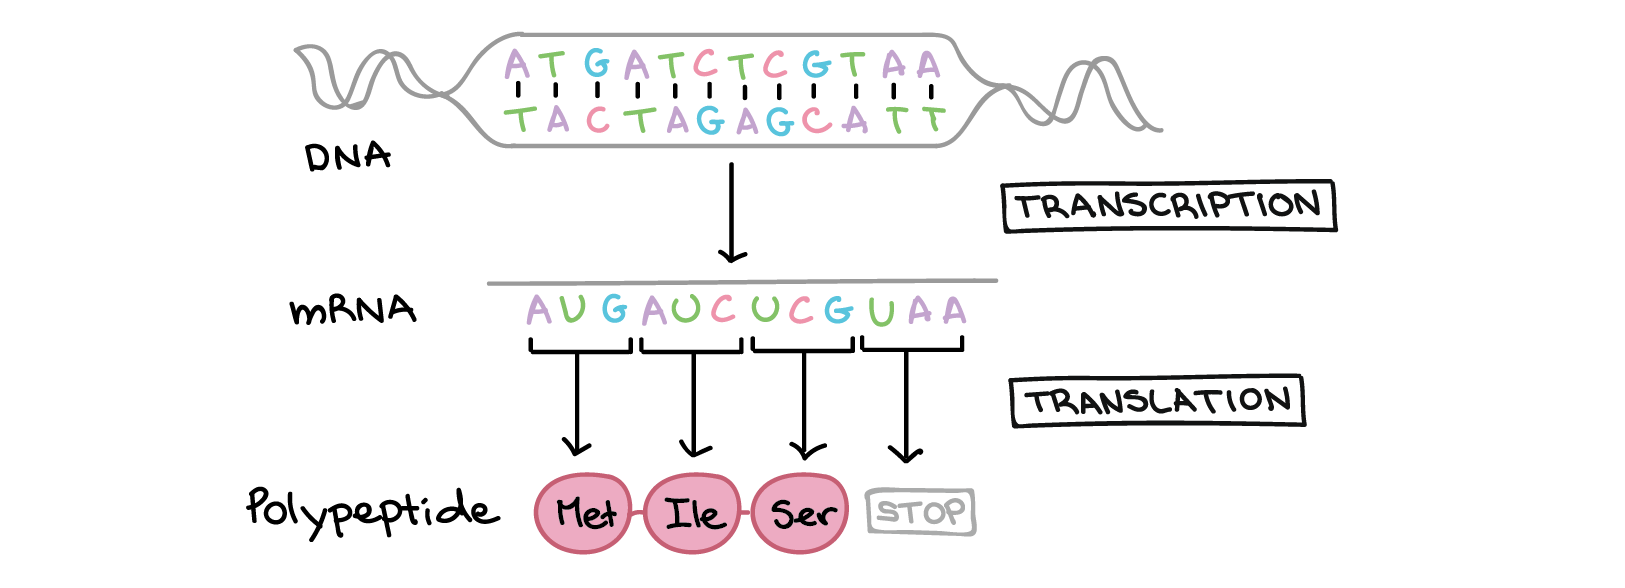 Simplified schematic of central dogma, showing the sequences of the molecules involved.

The two strands of DNA have the following sequences:

5'-ATGATCTCGTAA-3'
3'-TACTAGAGCATT-5'

Transcription of one of the strands of DNA produces an mRNA that nearly matches the other strand of DNA in sequence. However, due to a biochemical difference between DNA and RNA, the Ts of DNA are replaced with Us in the mRNA. The mRNA sequence is:

5'-AUGAUCUCGUAA-5'

Translation involves reading the mRNA nucleotides in groups of three, each of which specifies and amino acid (or provides a stop signal indicating that translation is finished).

3'-AUG AUC UCG UAA-5'

AUG $\rightarrow$ Methionine
AUC $\rightarrow$ Isoleucine
UCG $\rightarrow$ Serine
UAA $\rightarrow$ "Stop"

Polypeptide sequence: (N-terminus) Methionine-Isoleucine-Serine (C-terminus)
